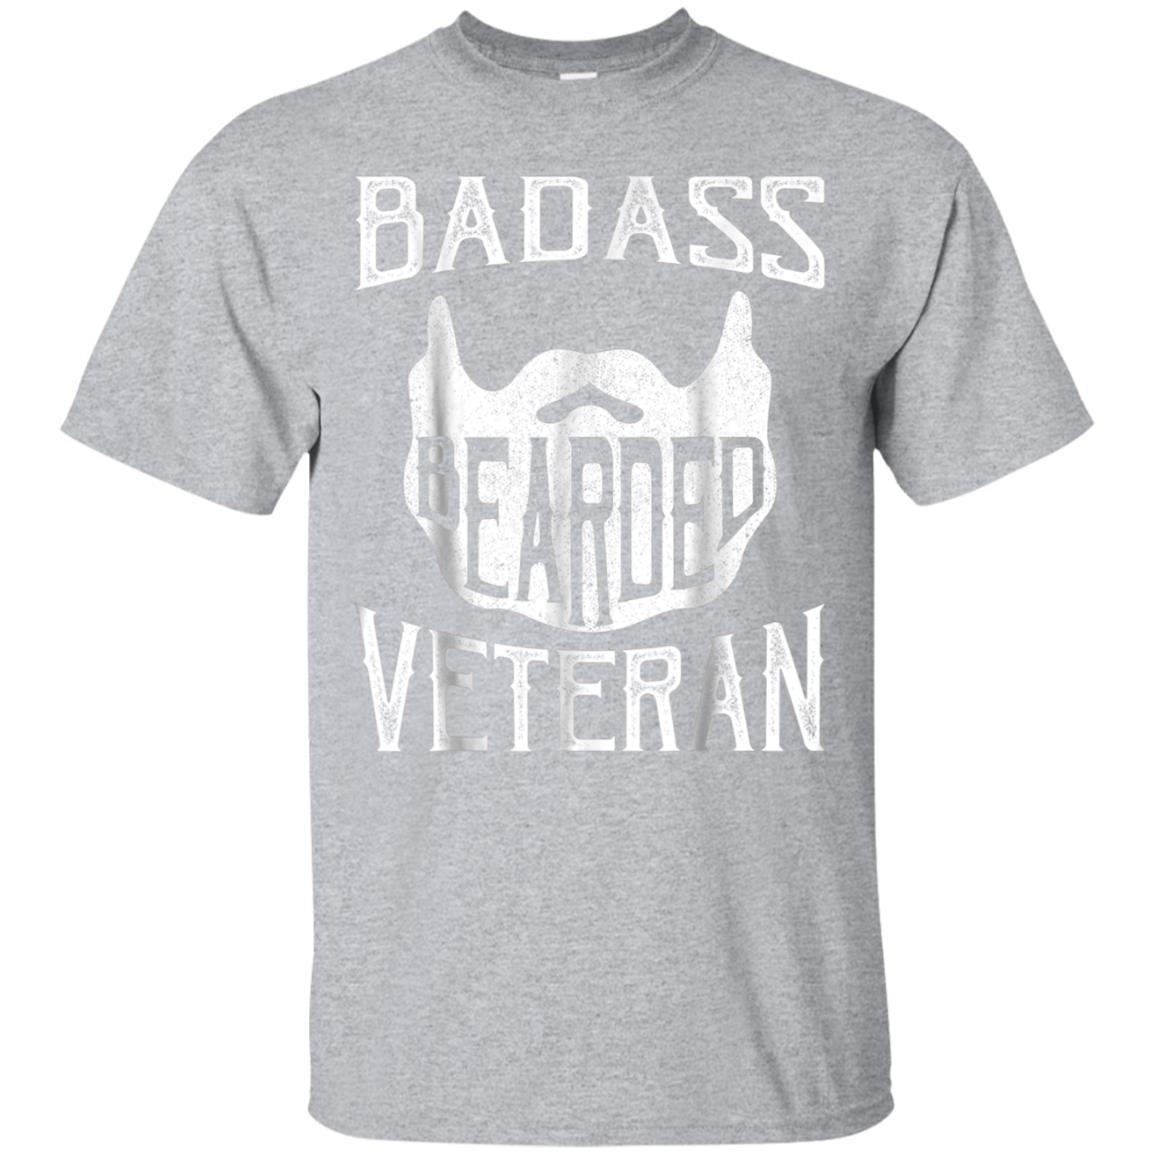 Download Awesome Badass Bearded Uncle Grandpa Dad Veterans Day Gift Shirt 99promocode